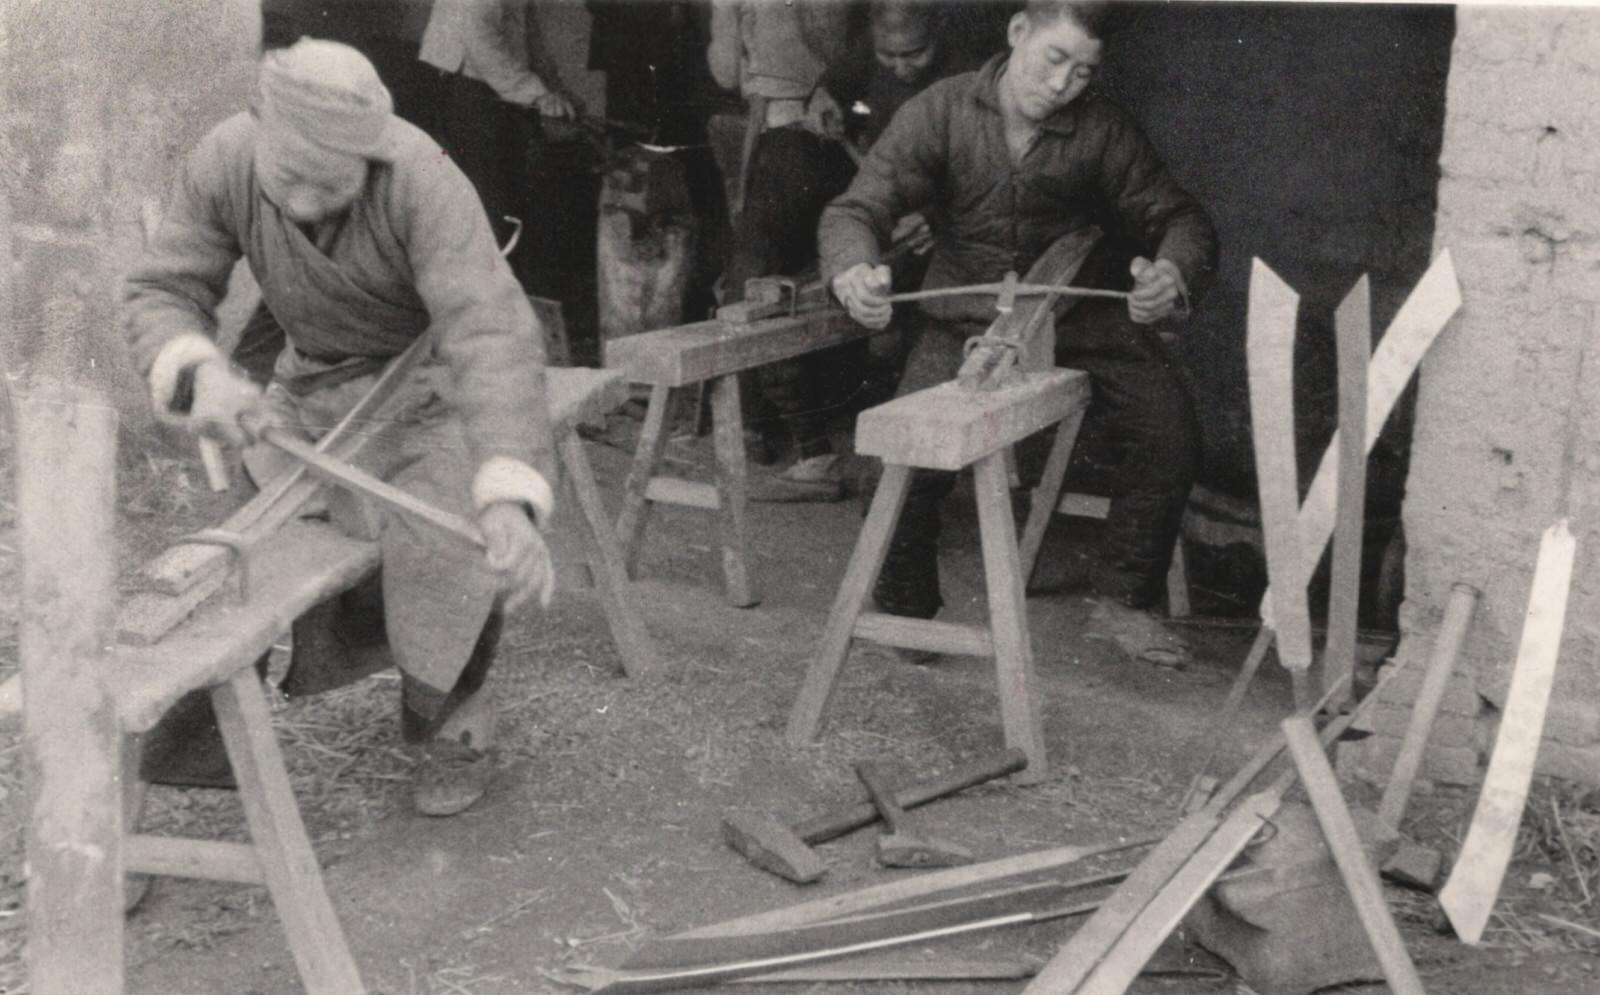 Railway workers on the Peking-Hankow (Beijing-Hankou) railway tore up steel railways and girders and made big swords for the guerrillas and the army from them. 1937-1940